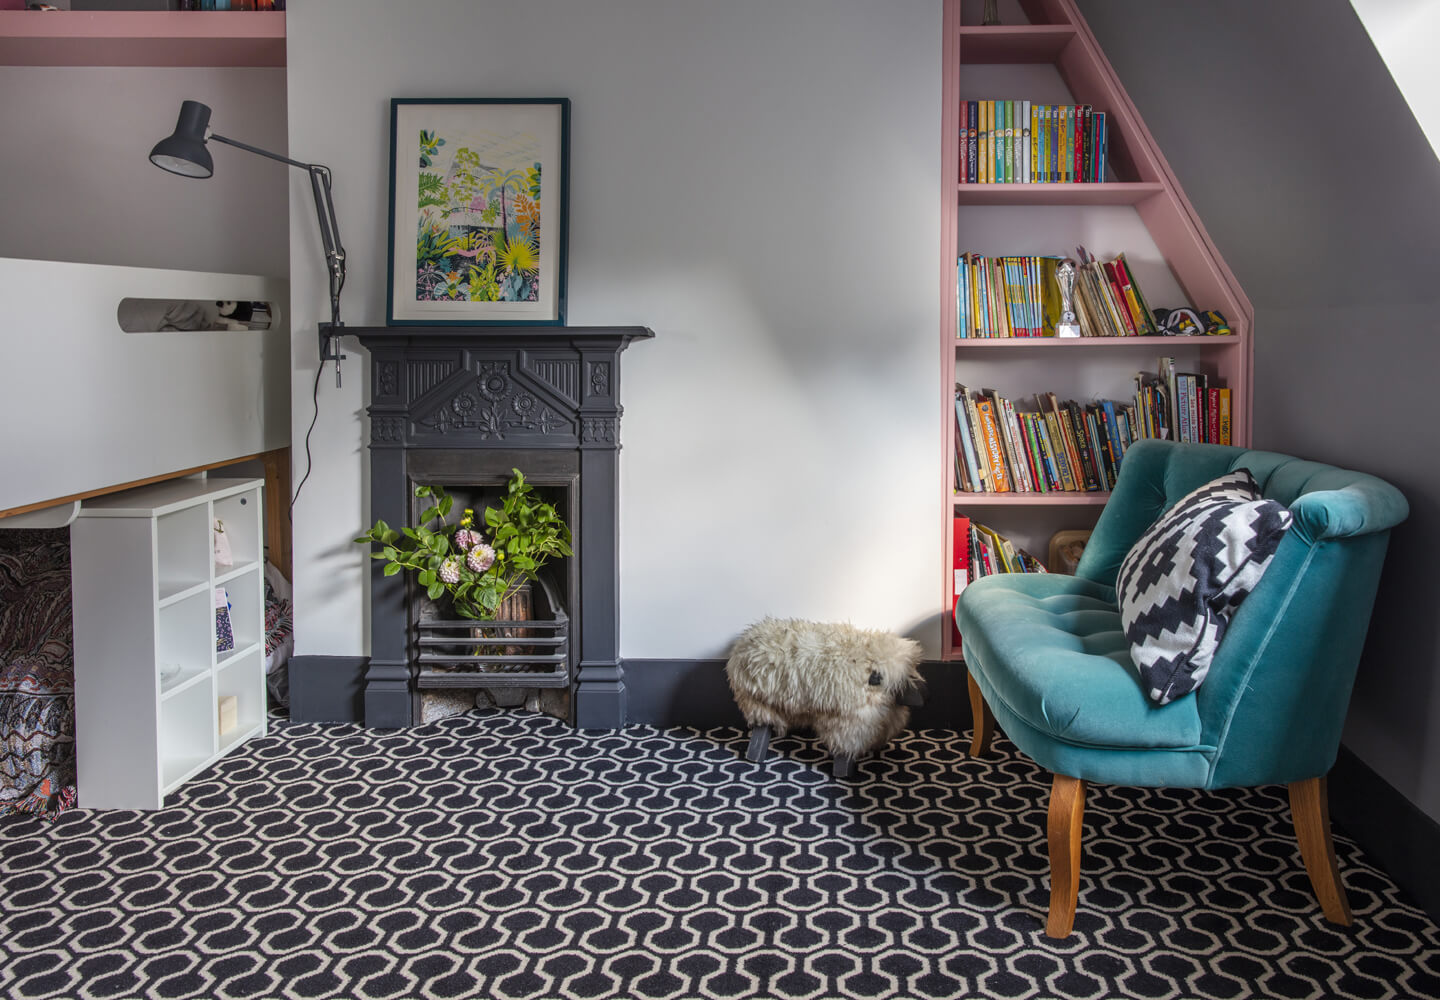 Alternative at Home with The Pink House, Emily Murray, Quirky B Honeycomb patterned bedroom carpet